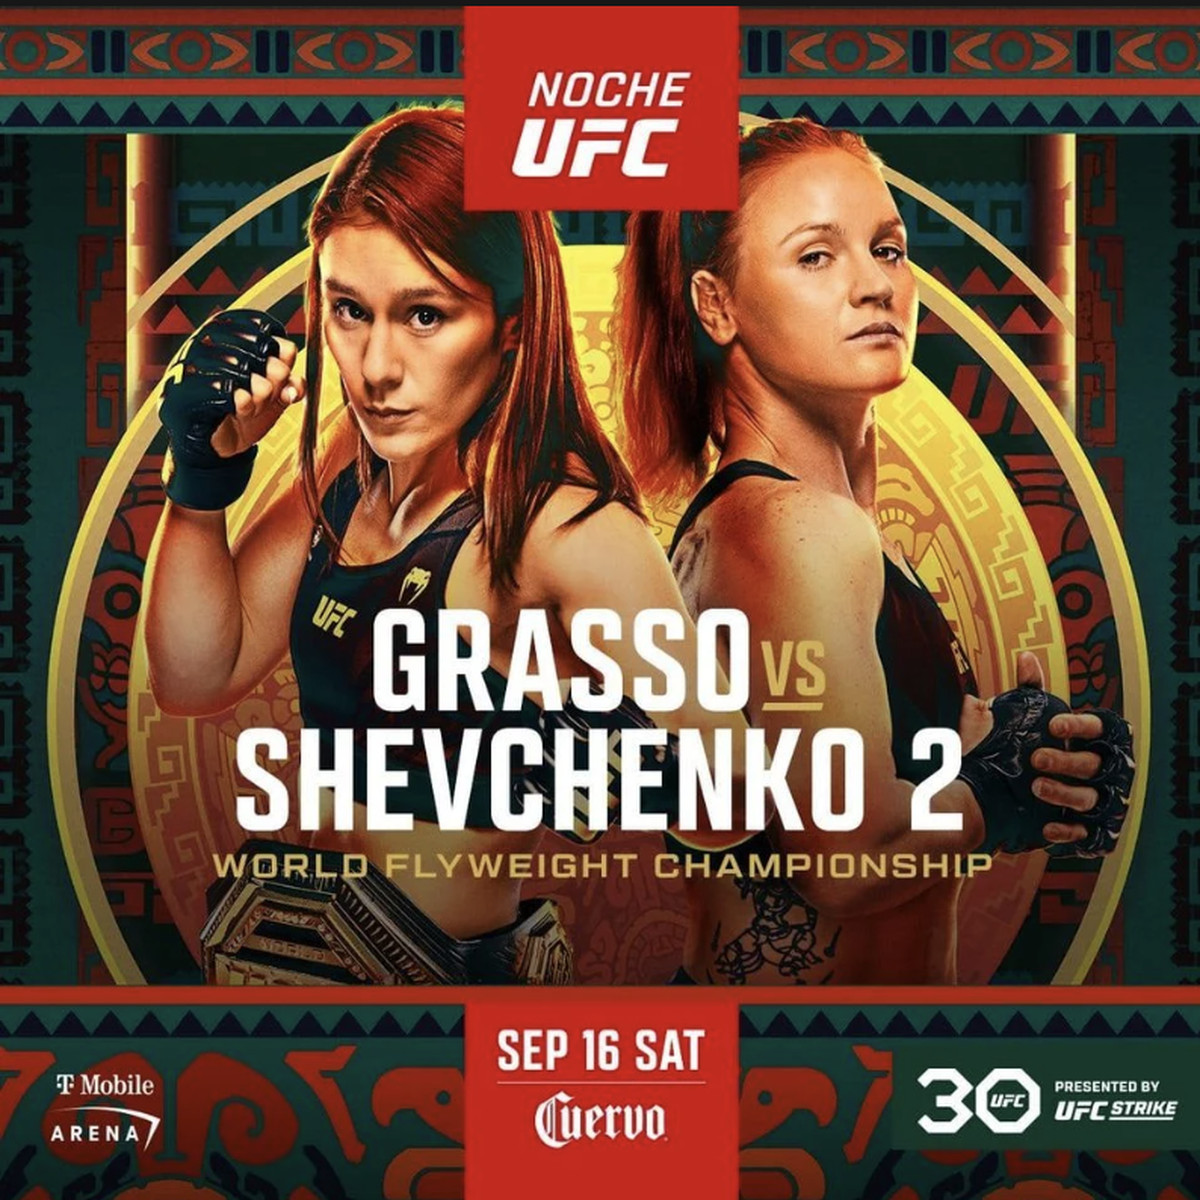 Noche UFC Live Results and Highlights